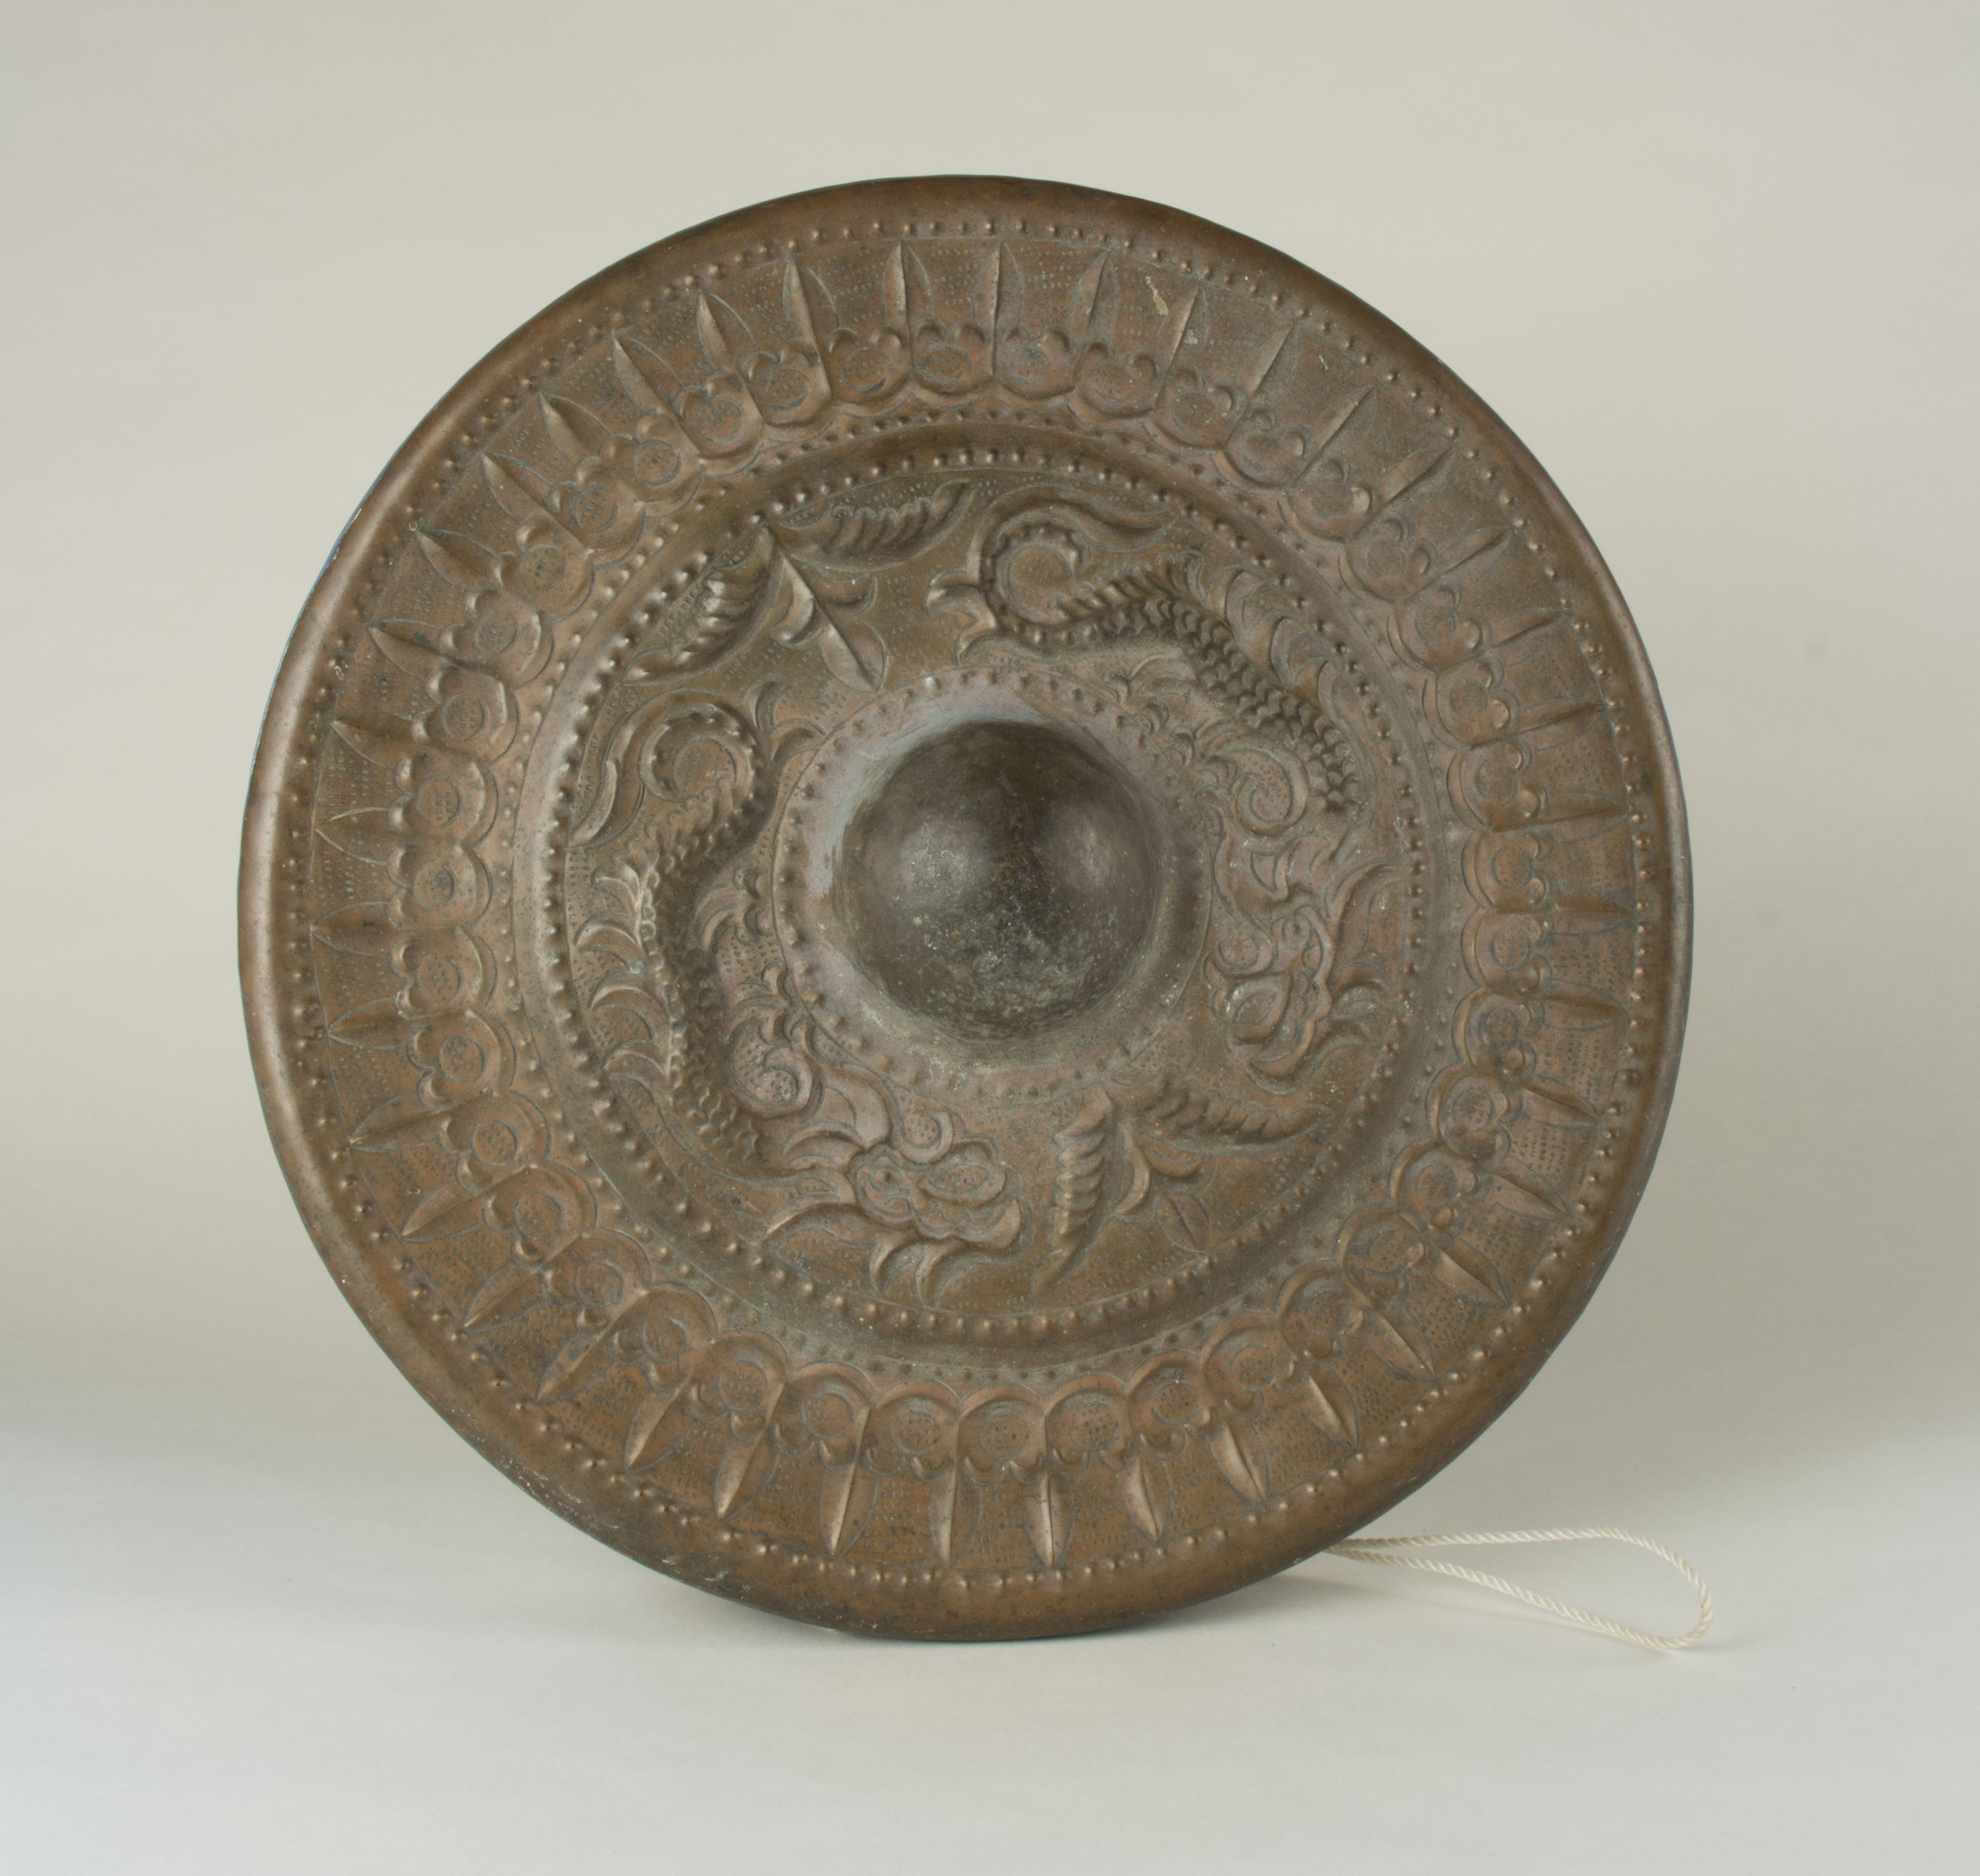 Gangsa bronze gong owned by Virginia B. Capulong- front view.Family heirloom from Abra, Northern Luzon. Any views, findings, conclusions, or recommendations expressed in this story do not necessarily represent those of the National Endowment for the Humanities. (c) Field Museum of Natural History - CC BY-NC 4.0